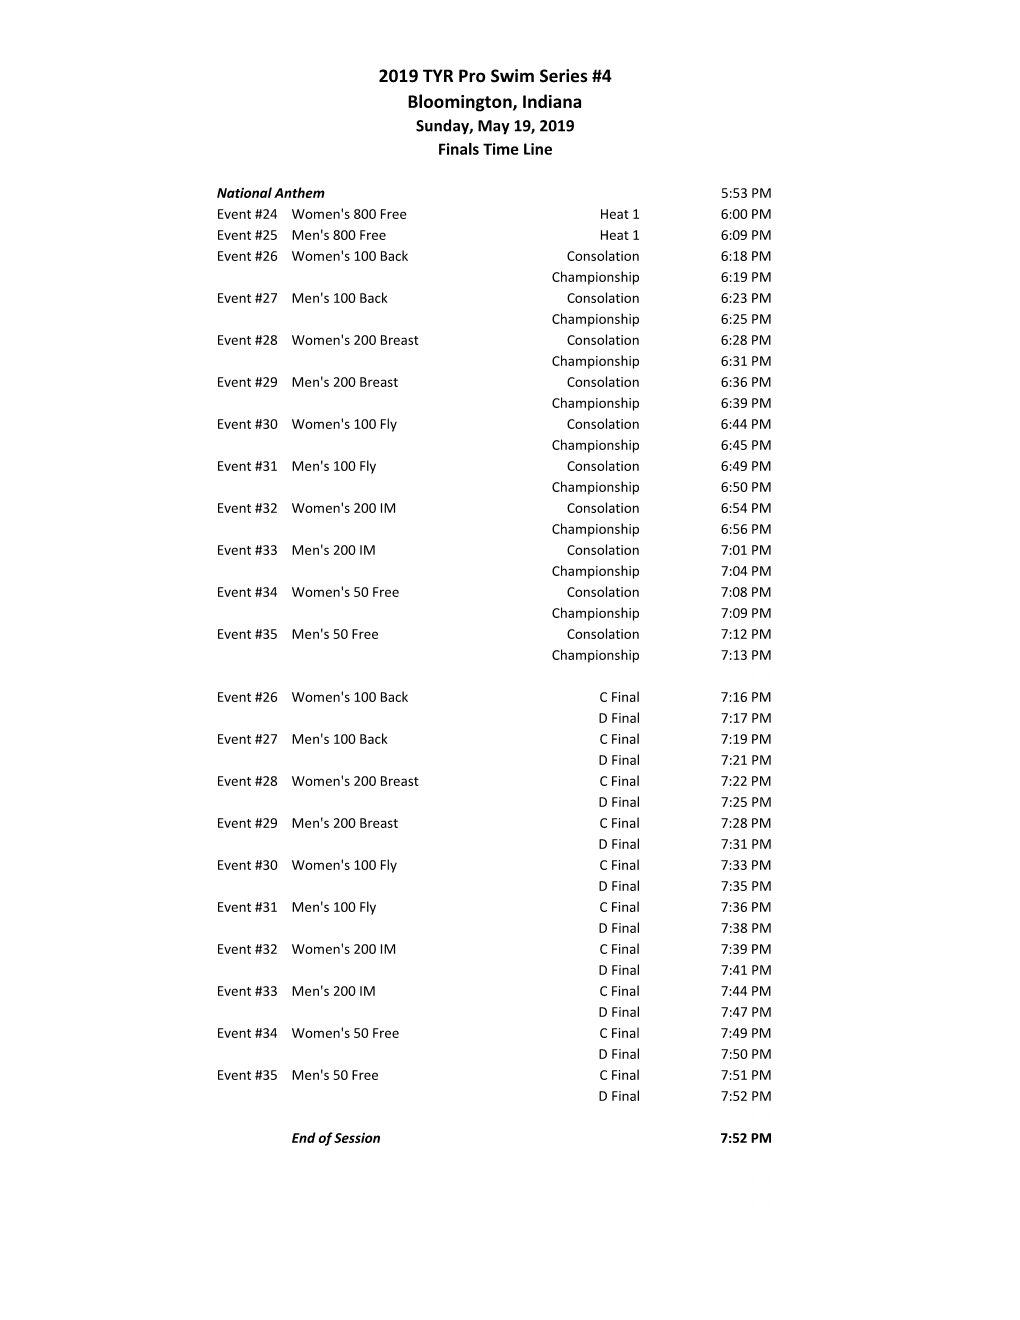 2019 TYR Pro Swim Series #4 Bloomington, Indiana Sunday, May 19, 2019 Finals Time Line